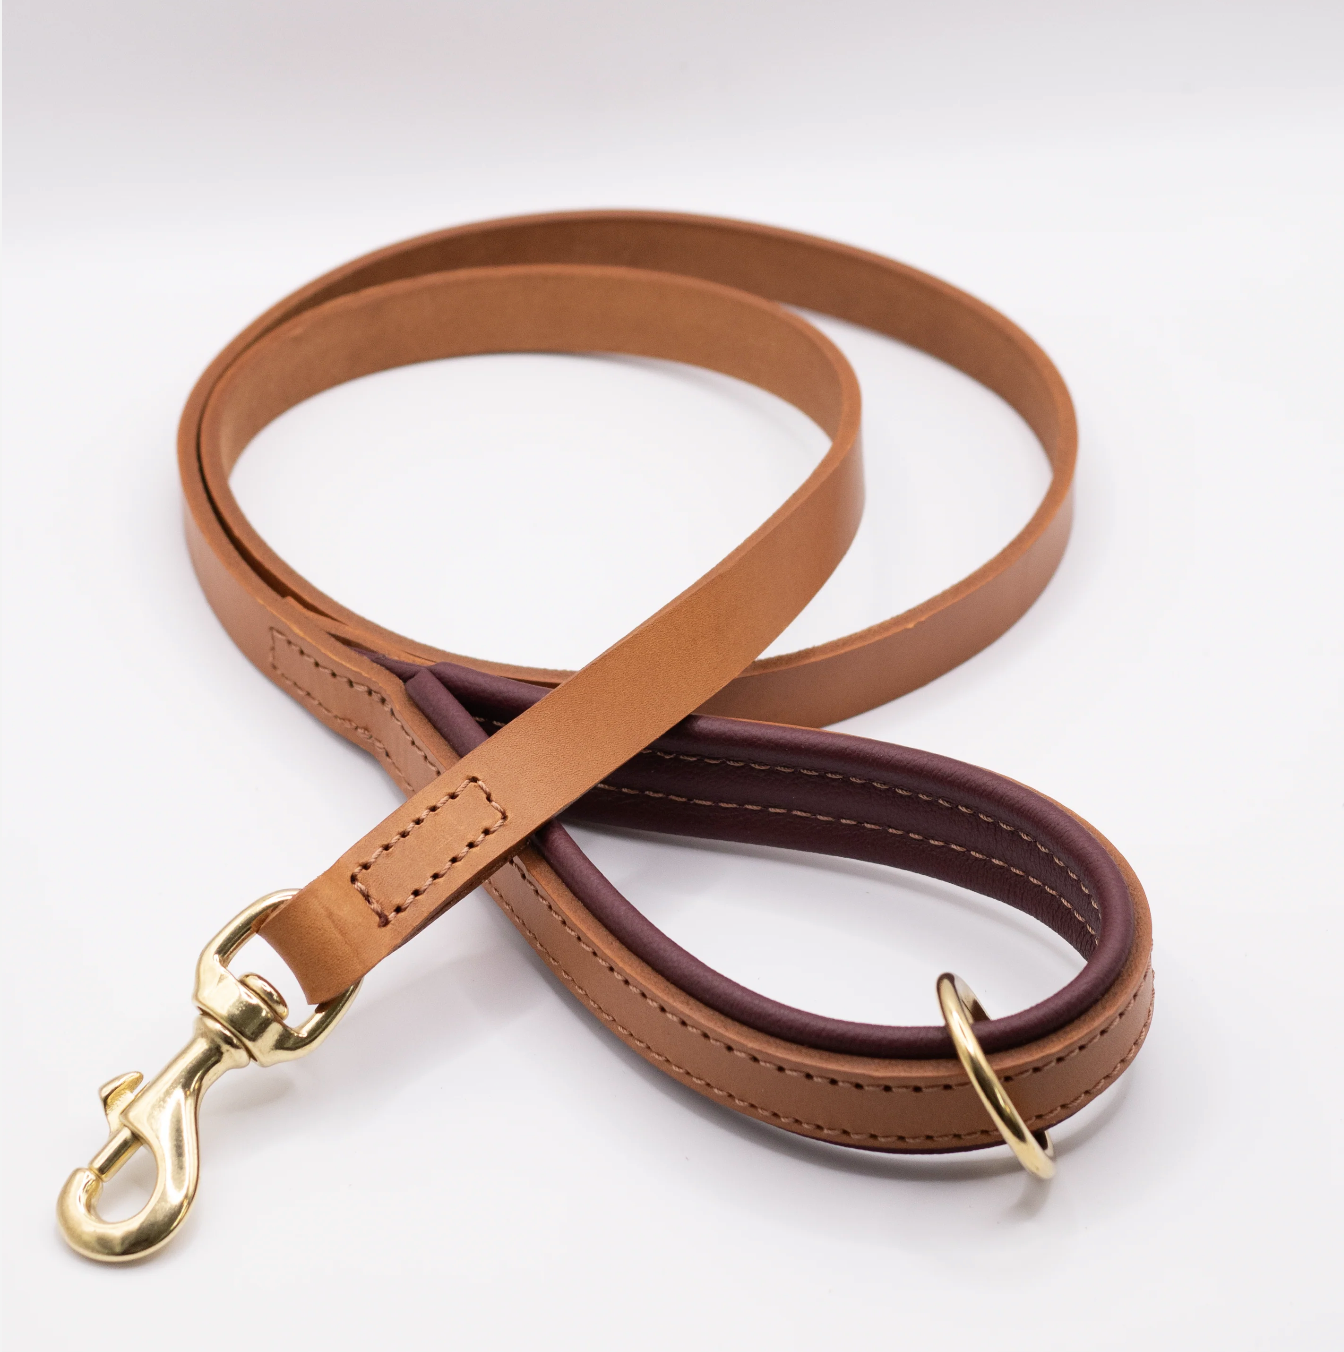 Padded Leather Dog Lead Tan and Merlot